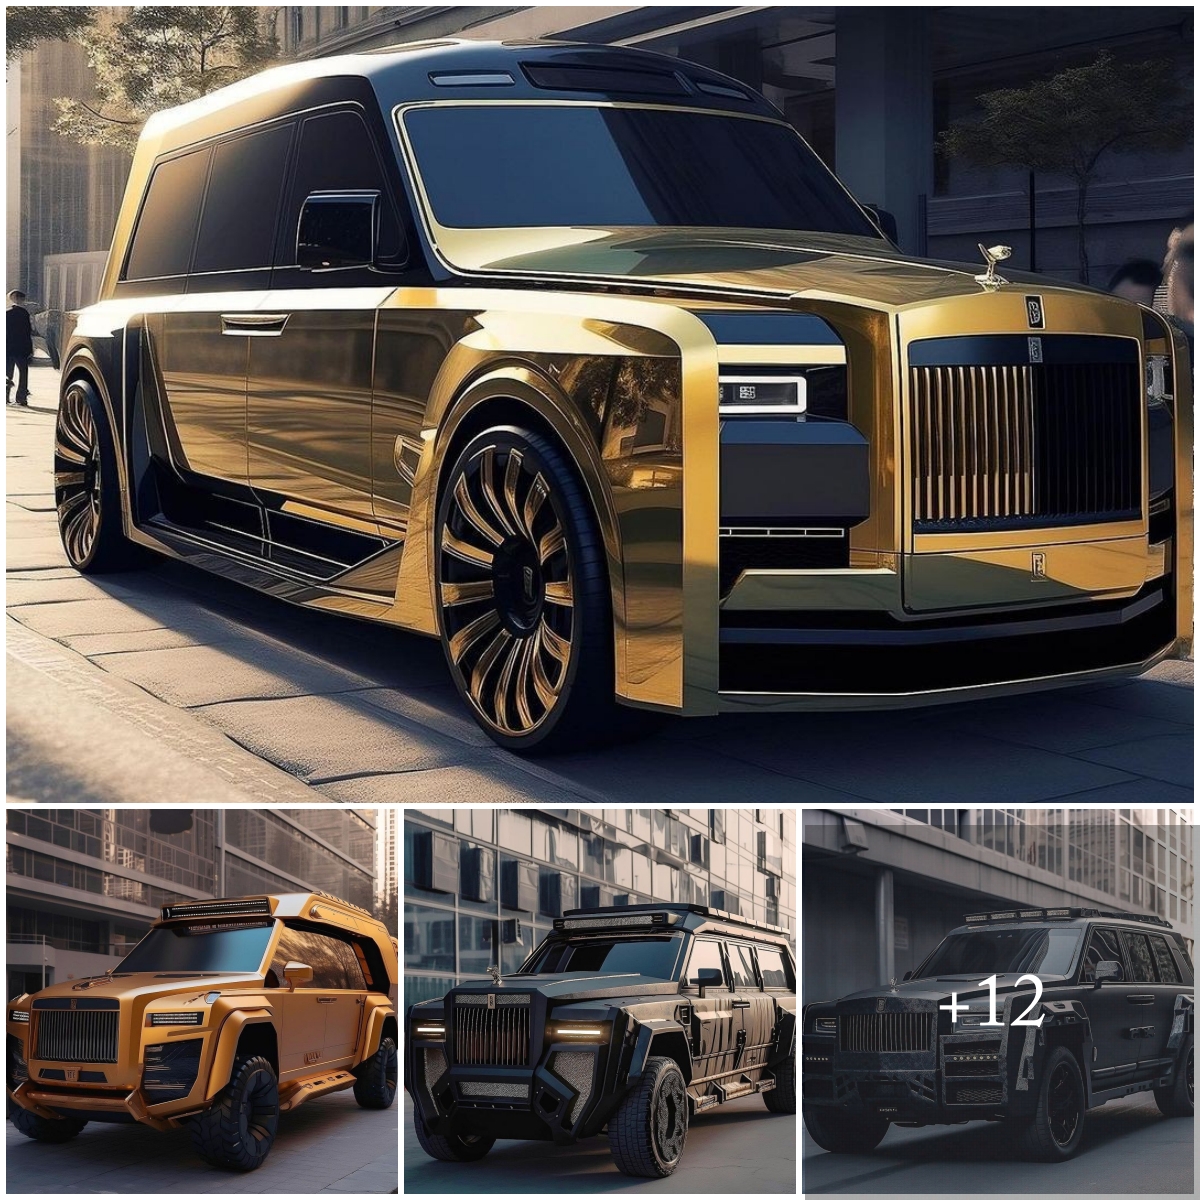 NEW Rolls-Royce Armored SUV Concept by Coldstar Art